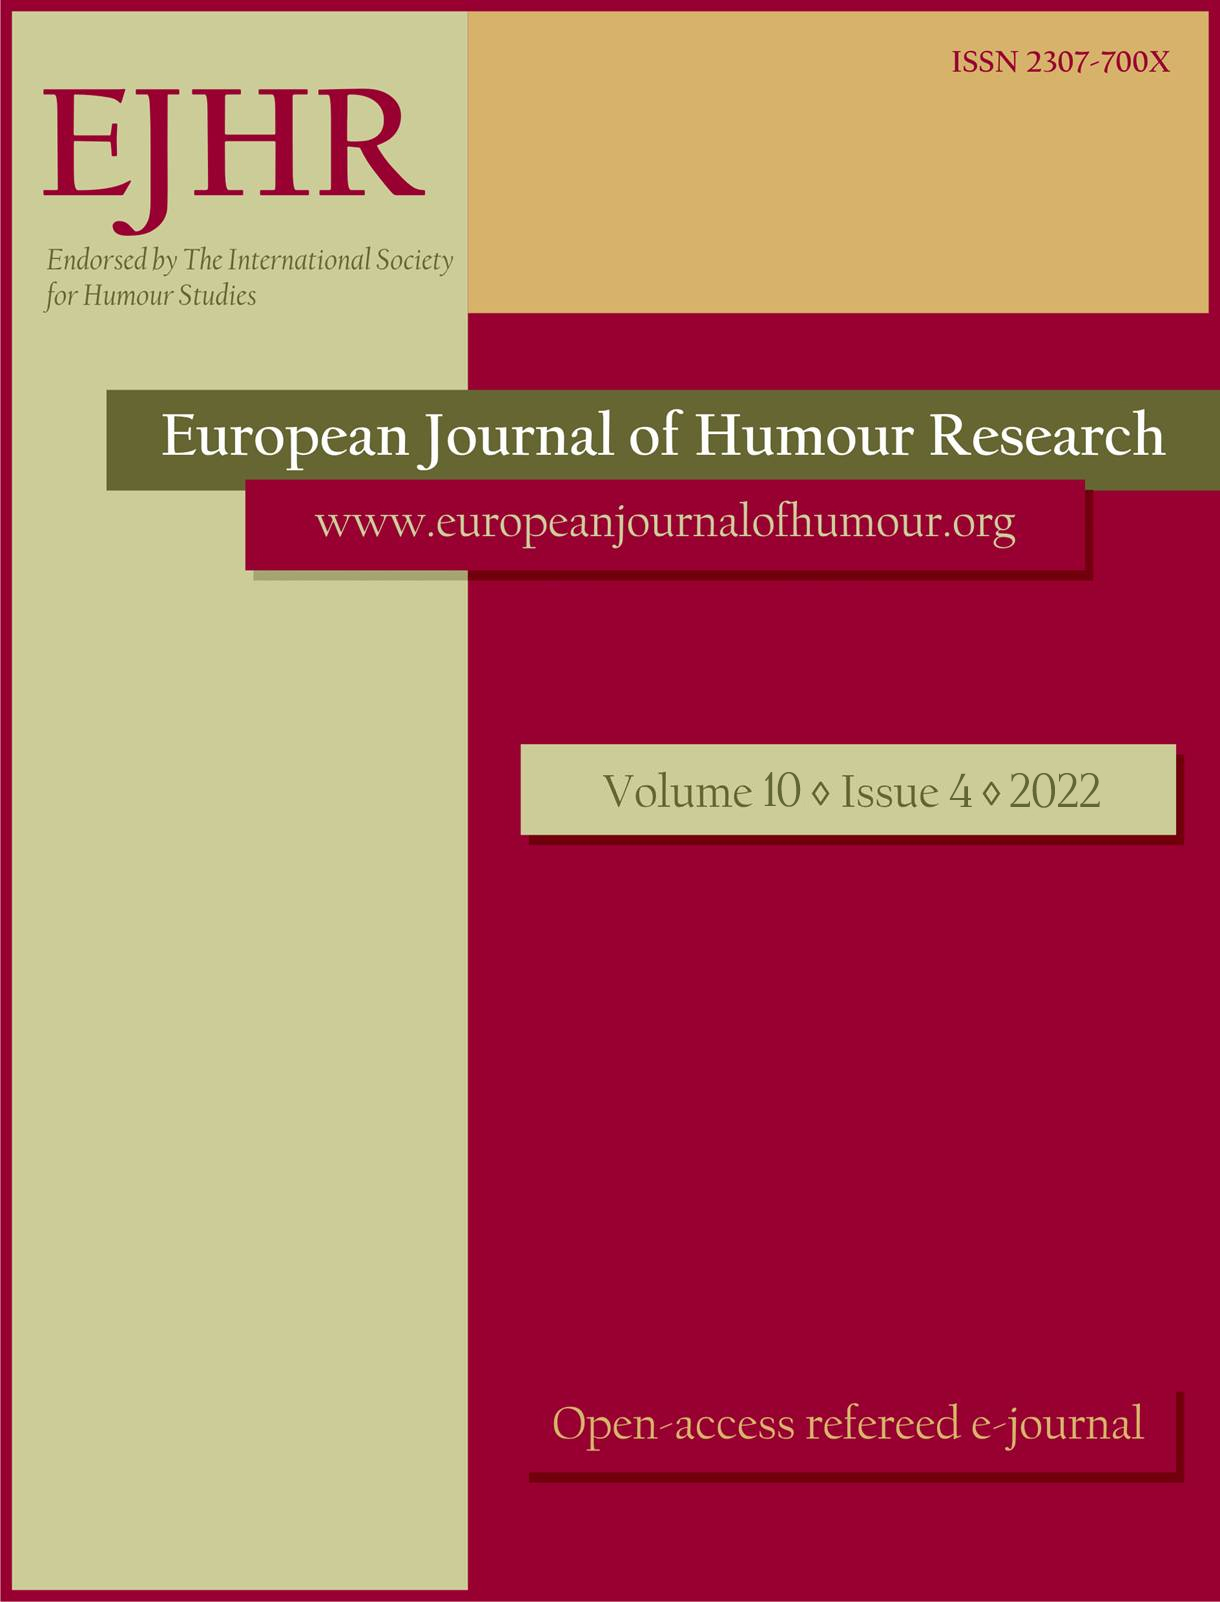 Scrapbook for the 10th anniversary of the European Journal of Humour Research